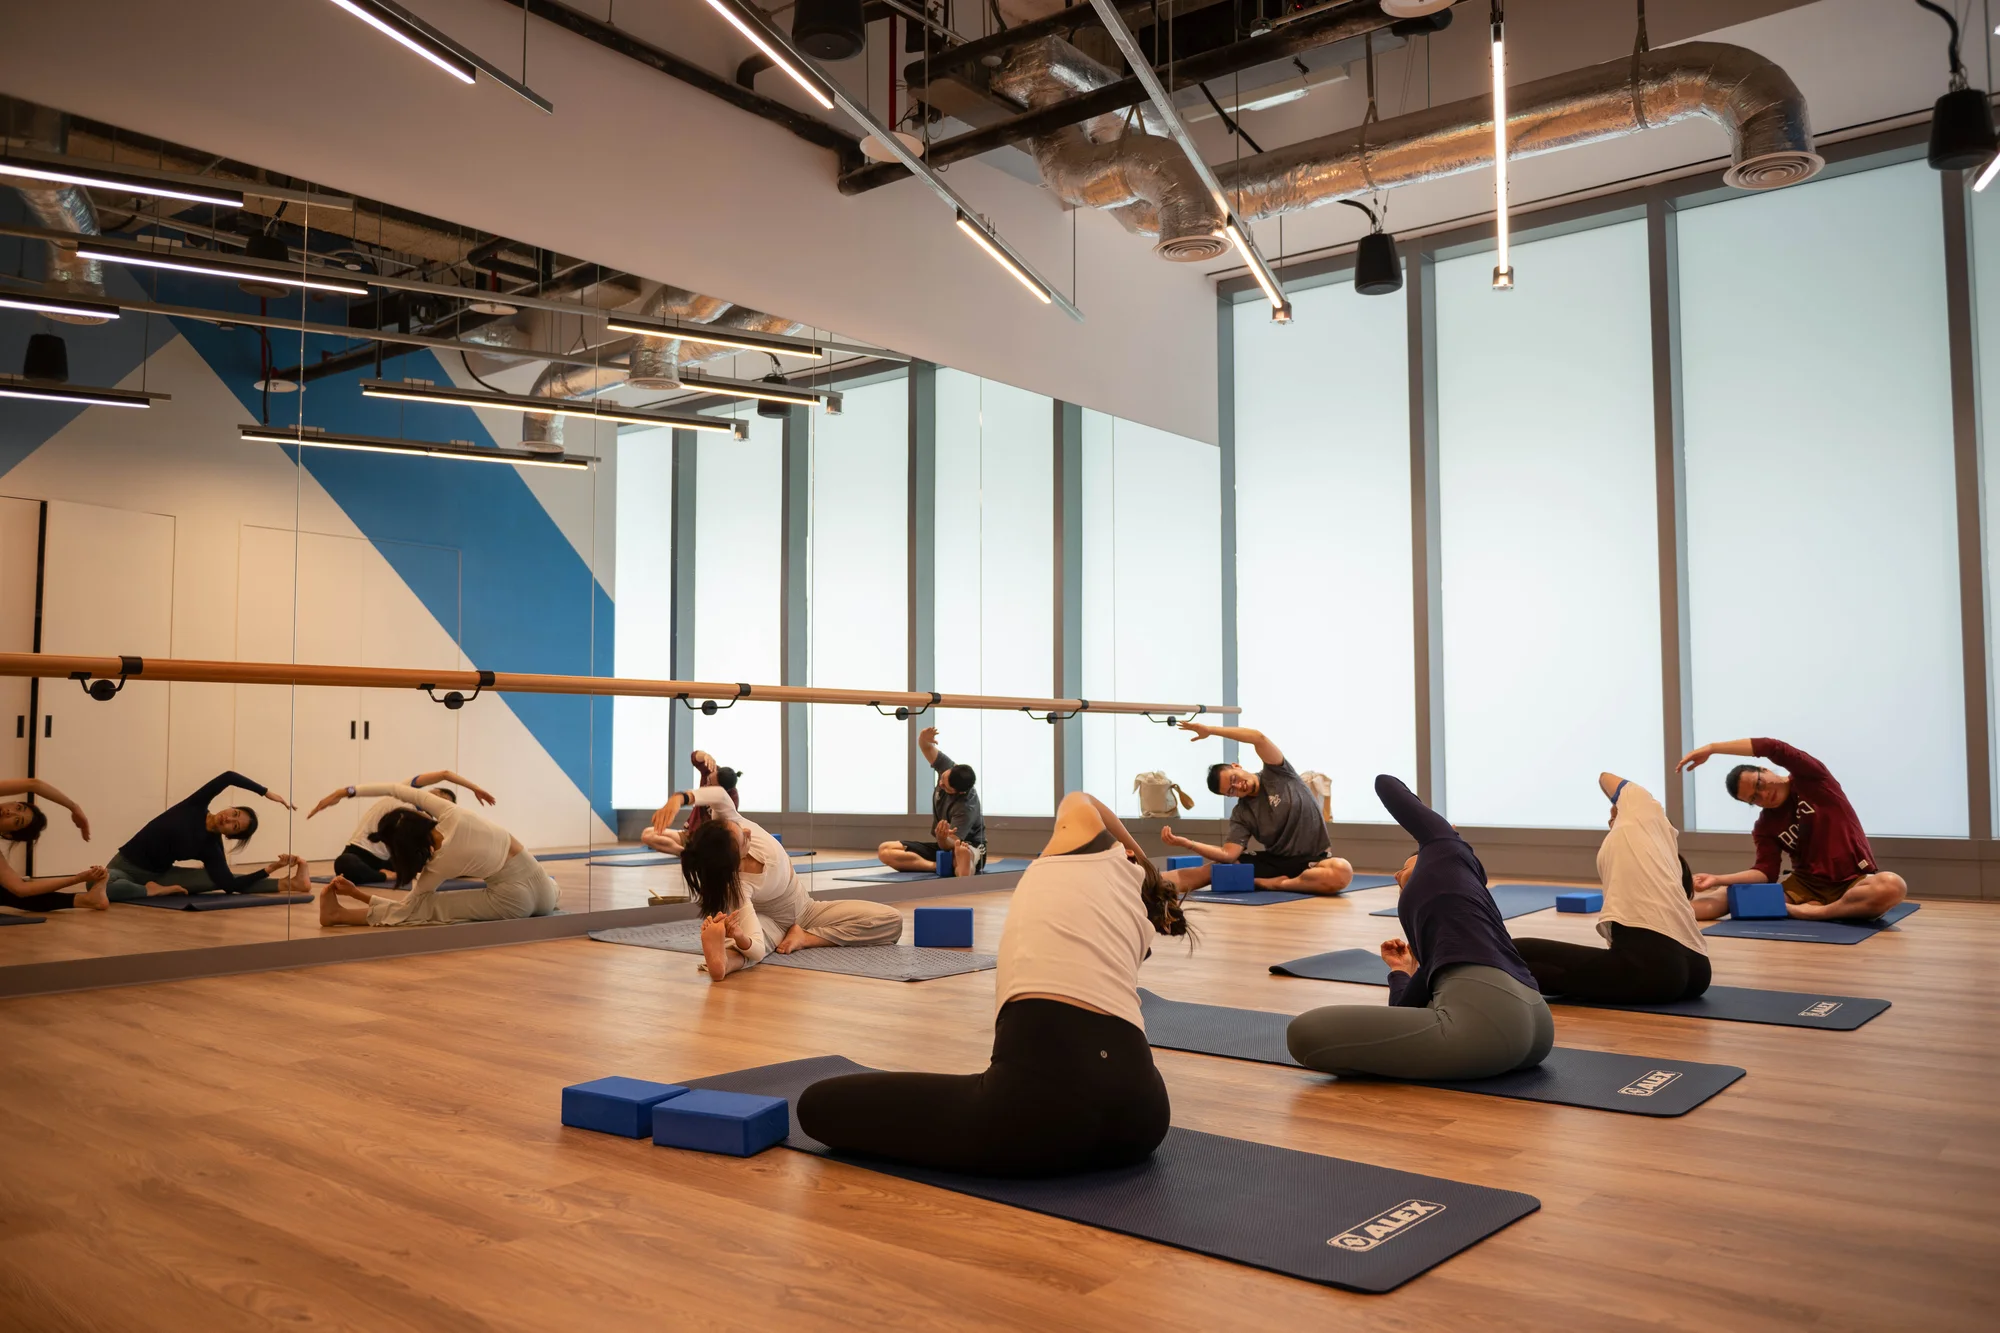 A group of people on yoga mats sit cross legged and stretch in a room with wooden floors and a mirrored wall.